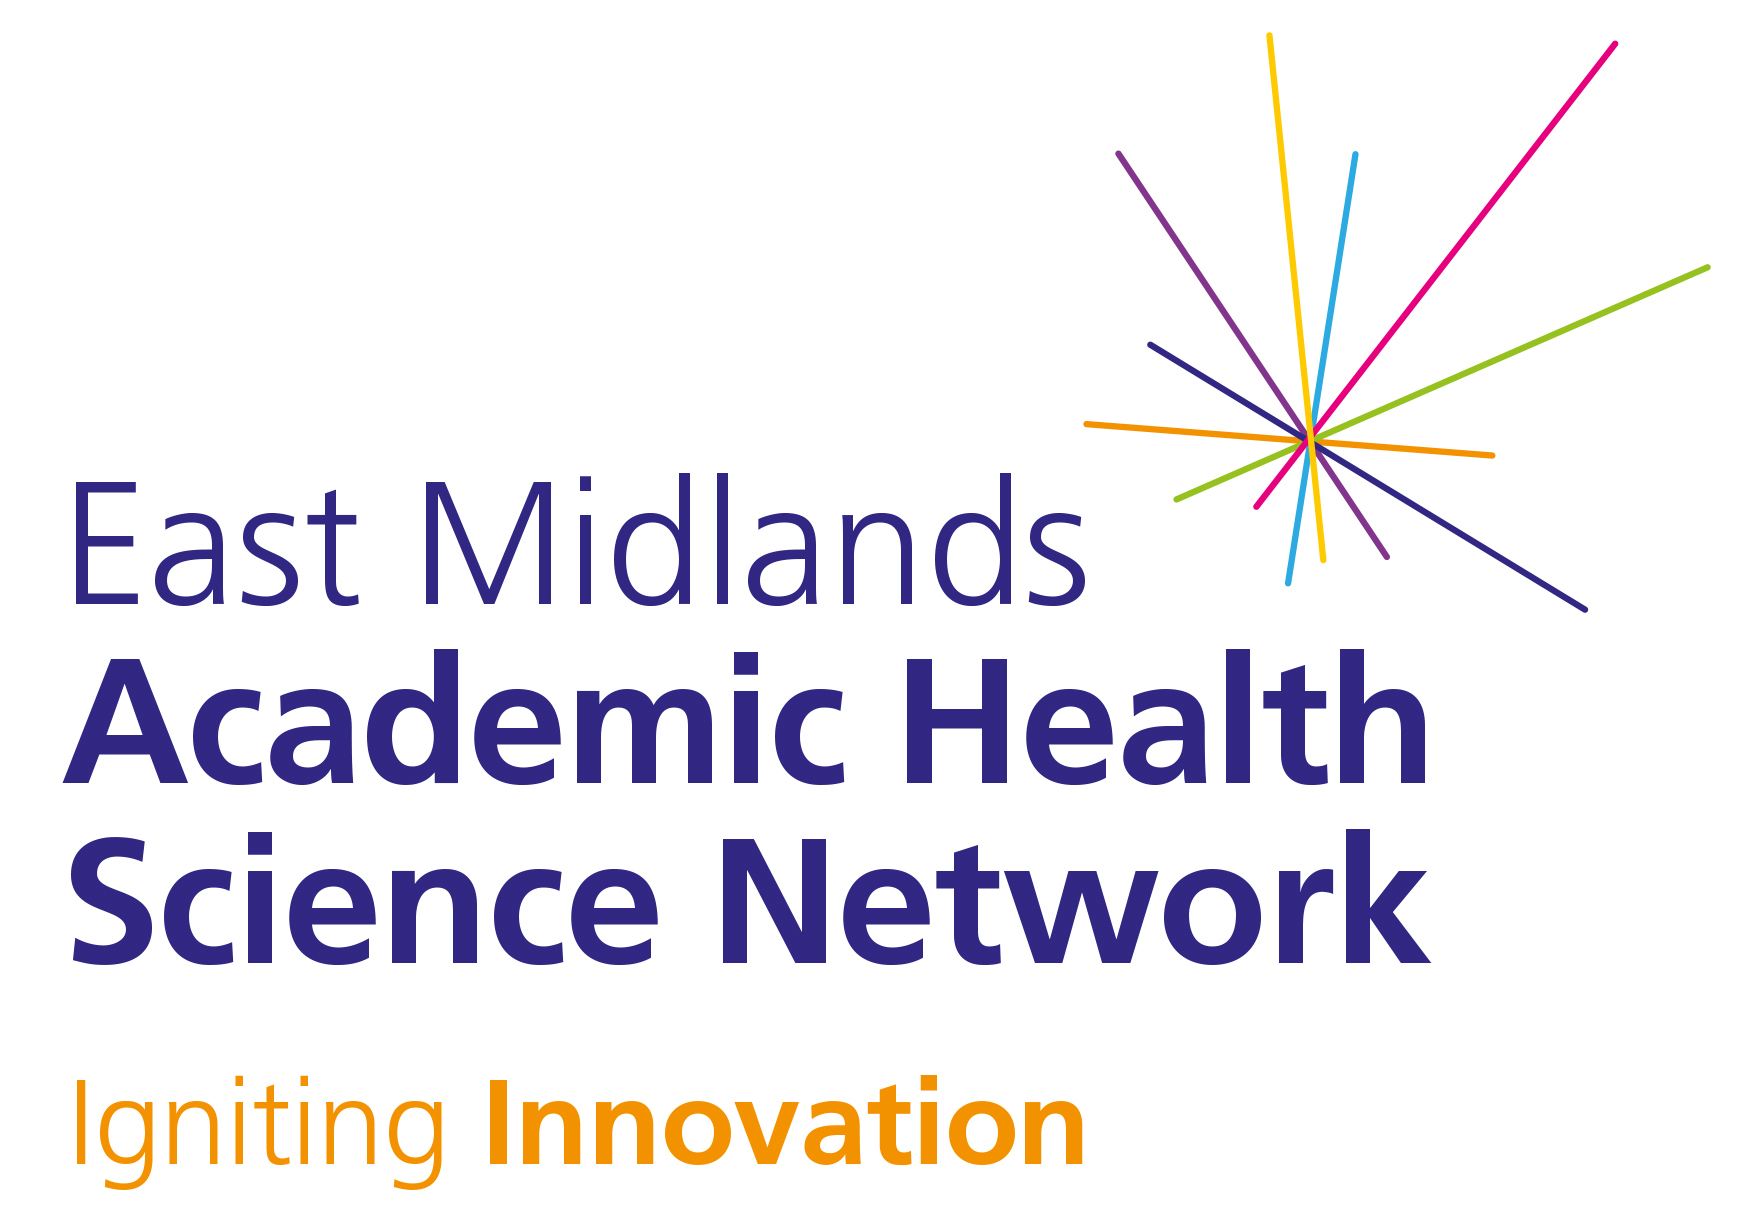 East Midlands Academic Health Science Network Igniting Innovation